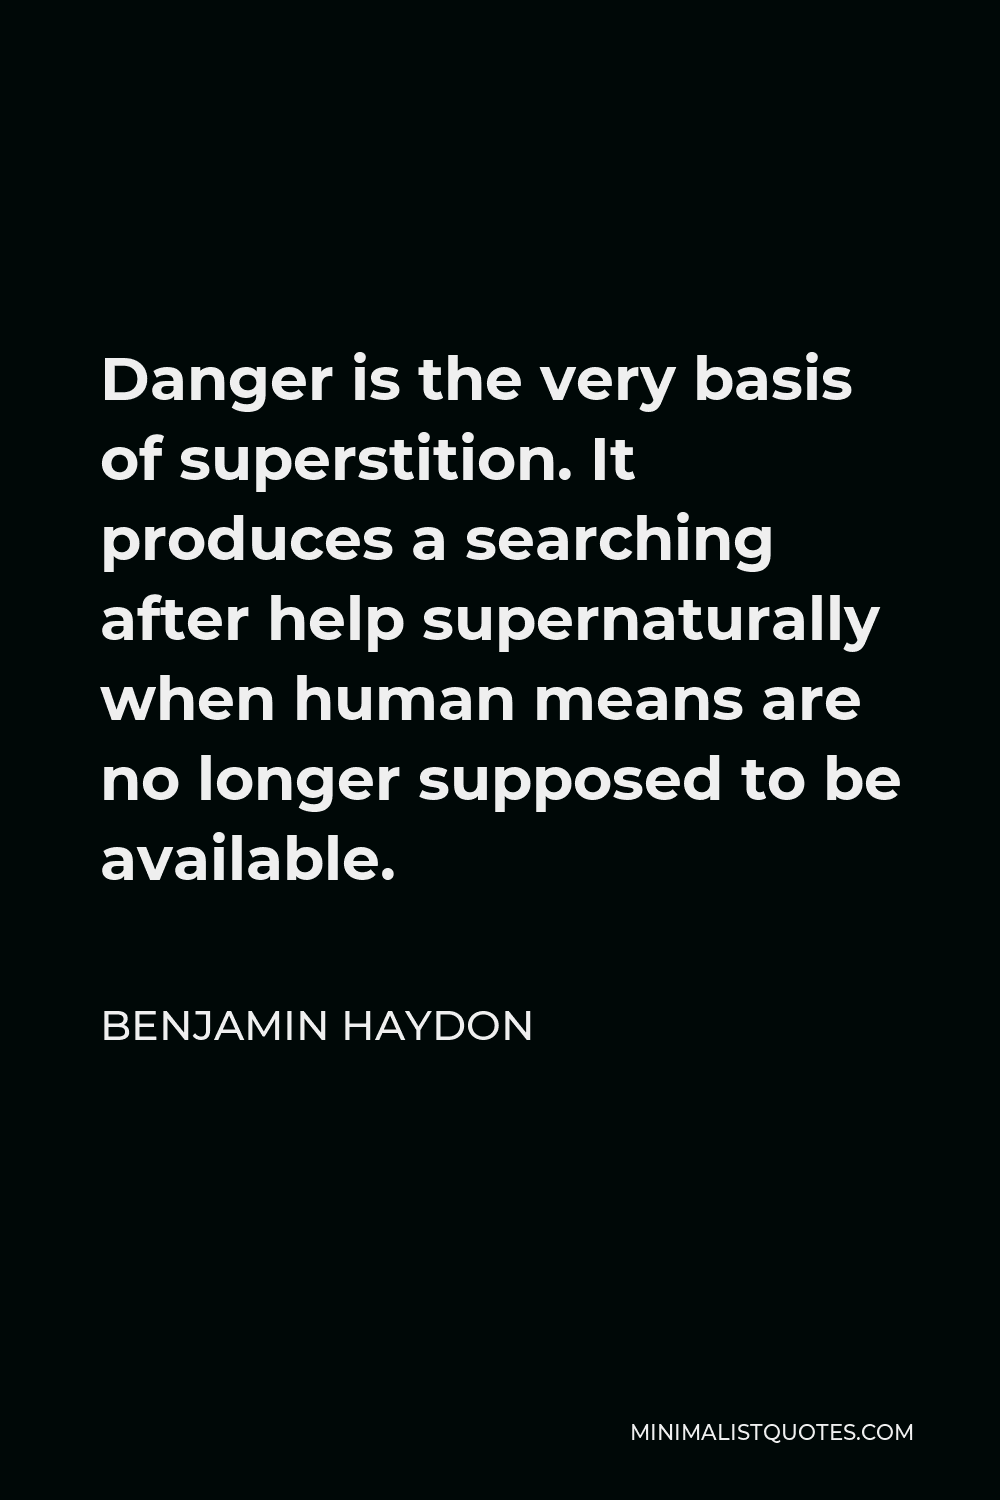 Benjamin Haydon Quote - Danger is the very basis of superstition. It produces a searching after help supernaturally when human means are no longer supposed to be available.